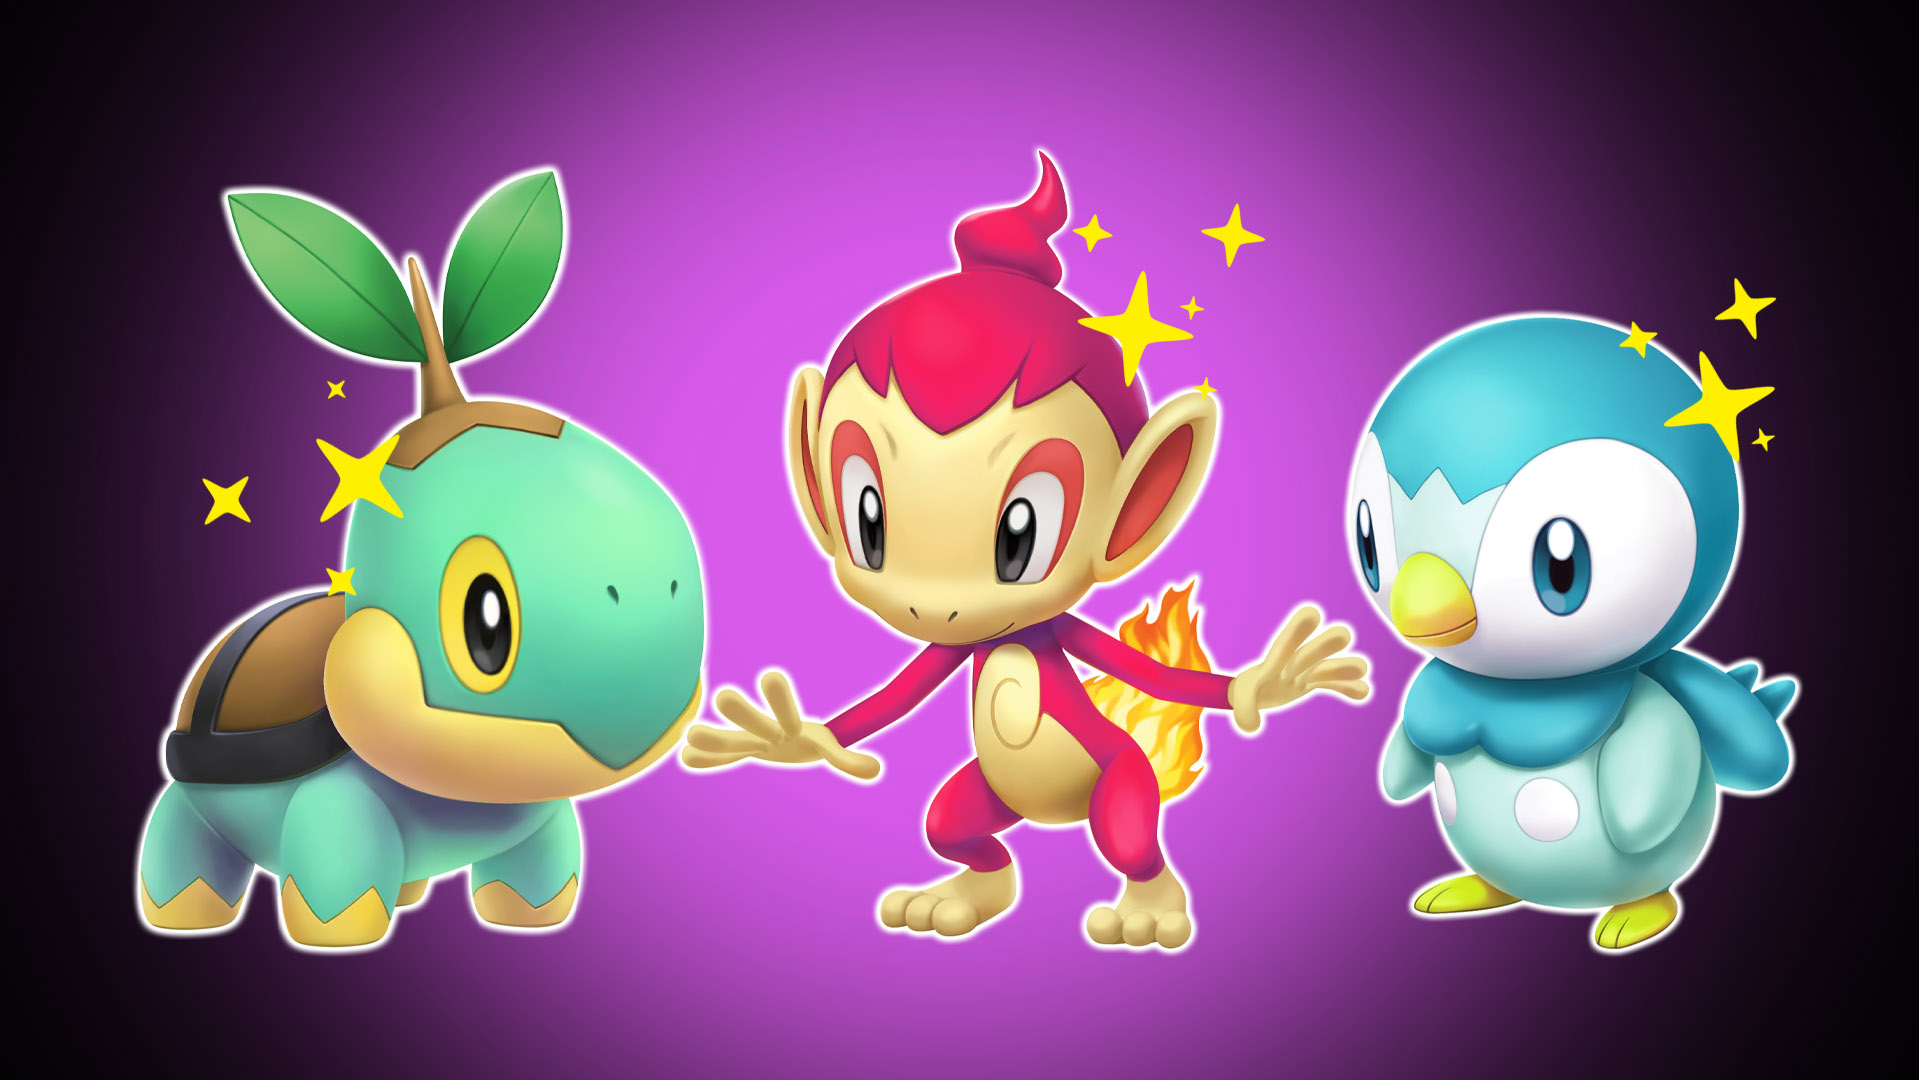 Pokémon Brilliant Diamond Shining Pearl starters Turtwig, Chimchar and  Piplup: Which starter is best?